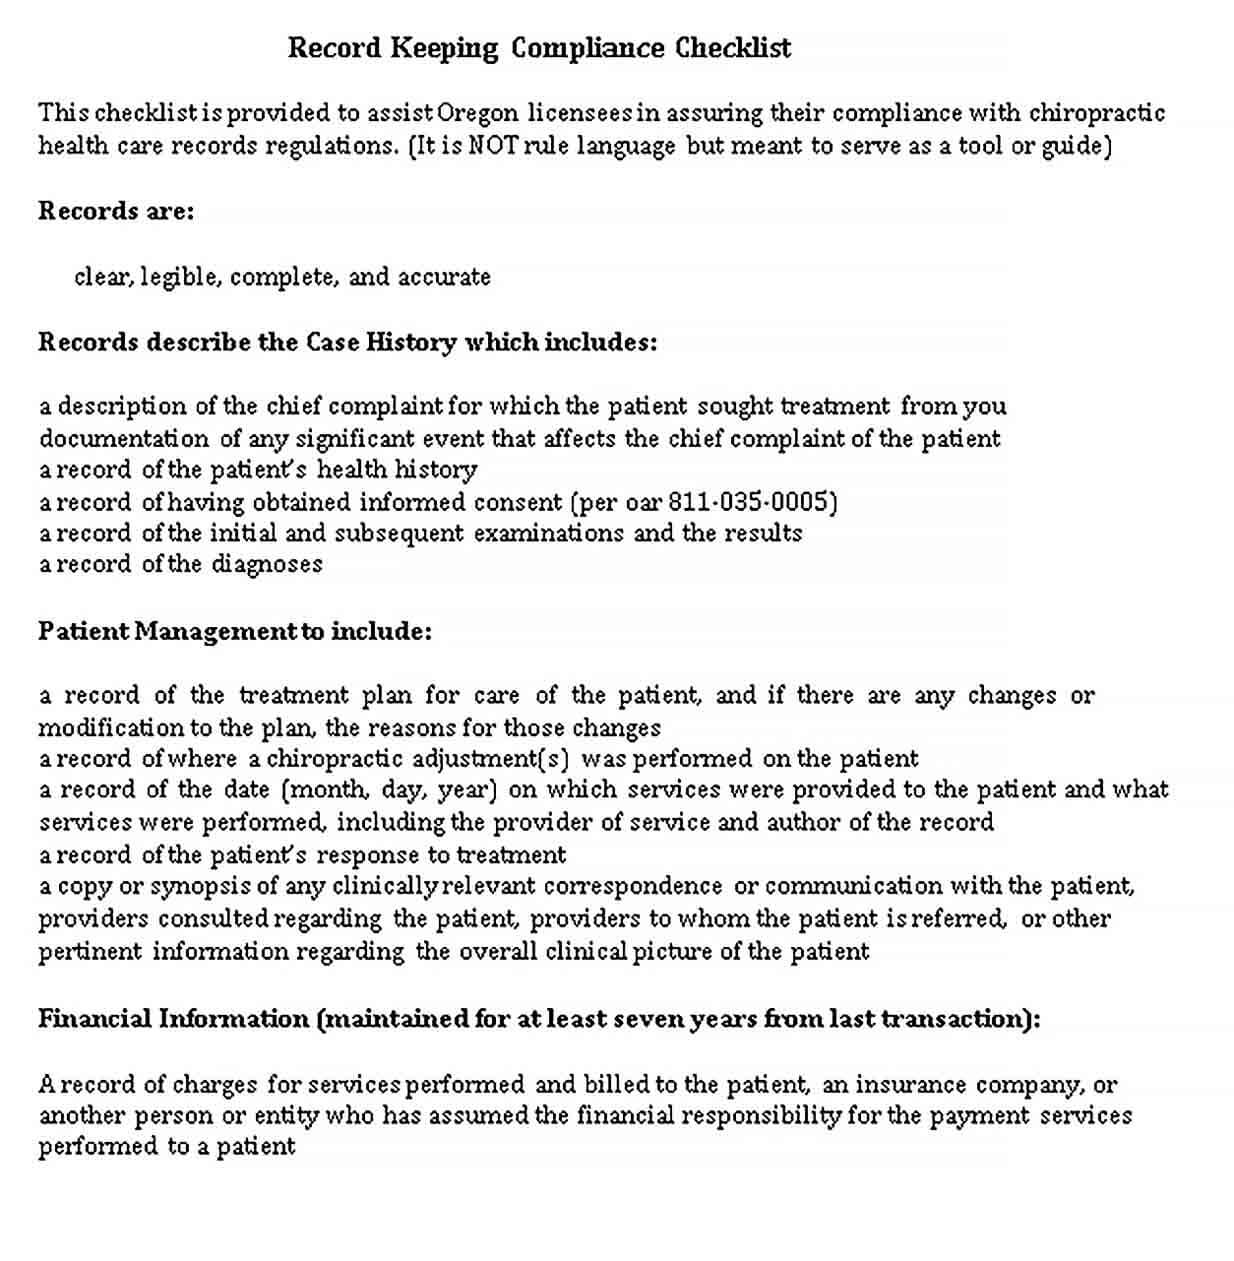 Sample Medical Record Keeping Checklist Template